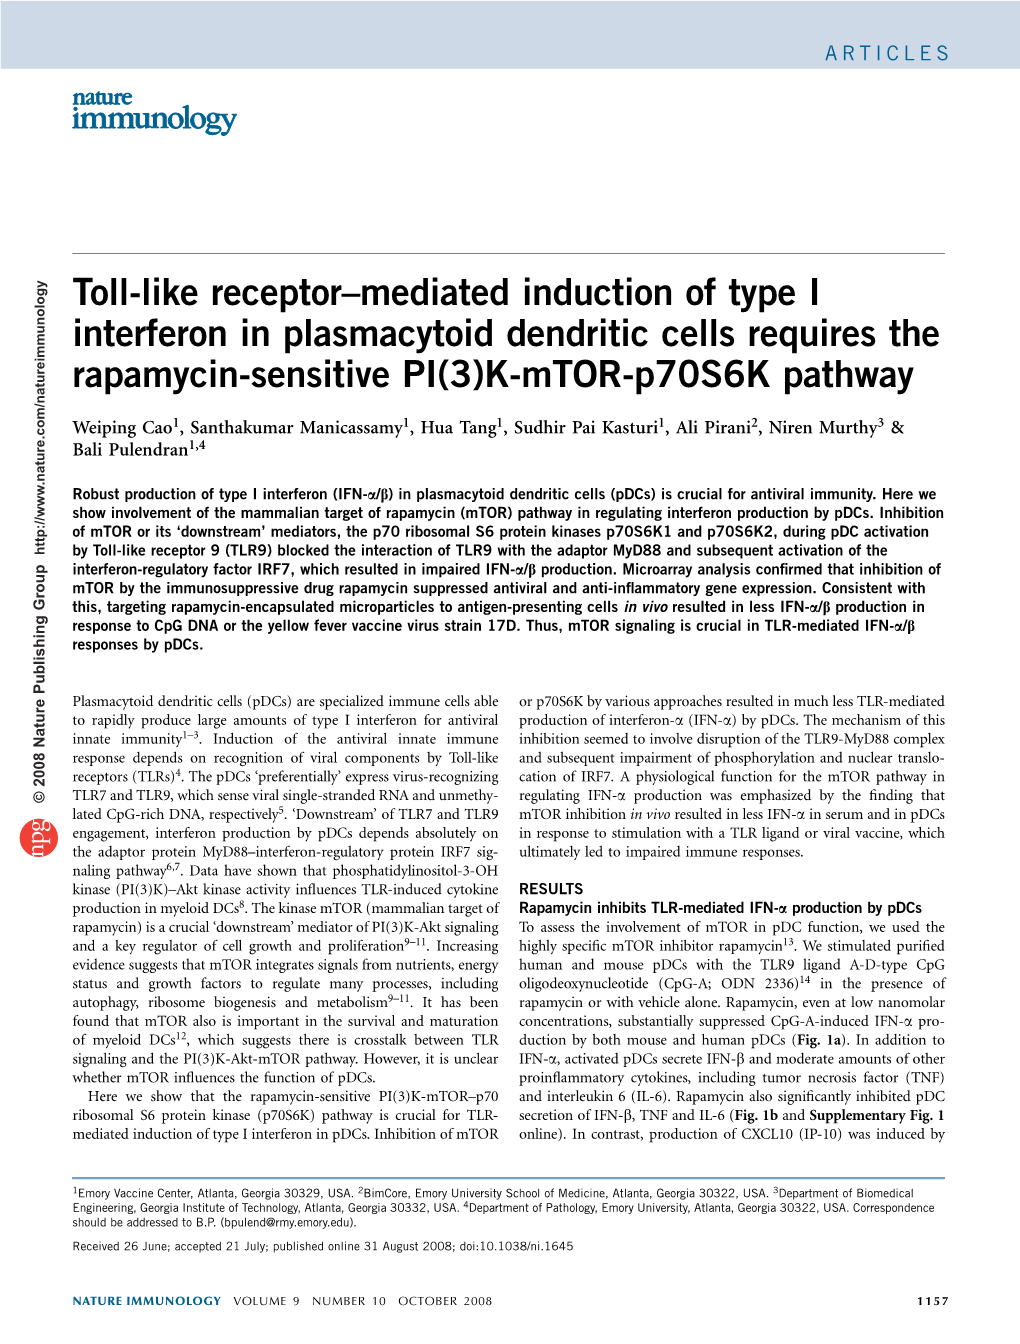 Toll-Like Receptor–Mediated Induction of Type I Interferon in Plasmacytoid Dendritic Cells Requires the Rapamycin-Sensitive PI(3)K-Mtor-P70s6k Pathway